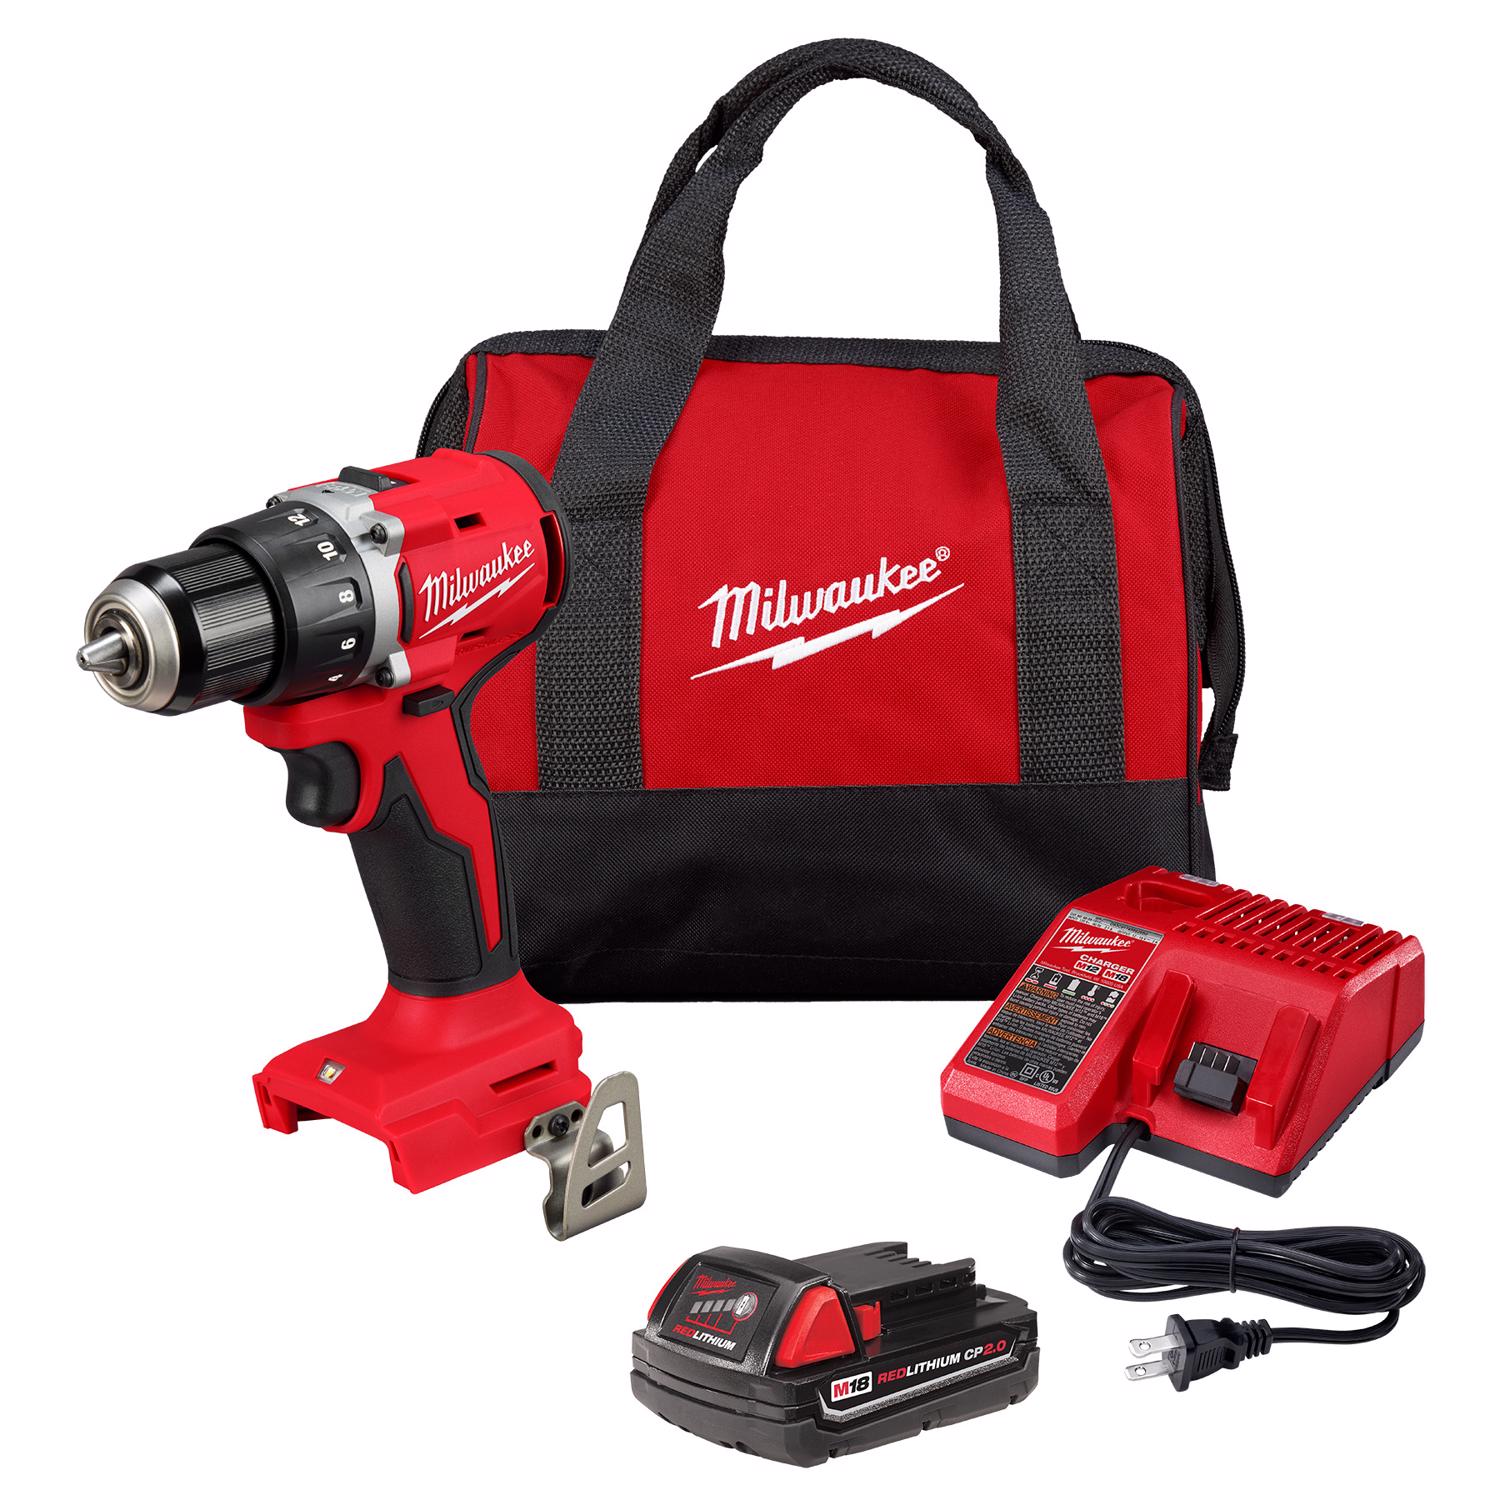 Photos - Drill / Screwdriver Milwaukee M18 Compact Next Gen 1/2 in. Brushless Cordless Drill/Driver Kit 